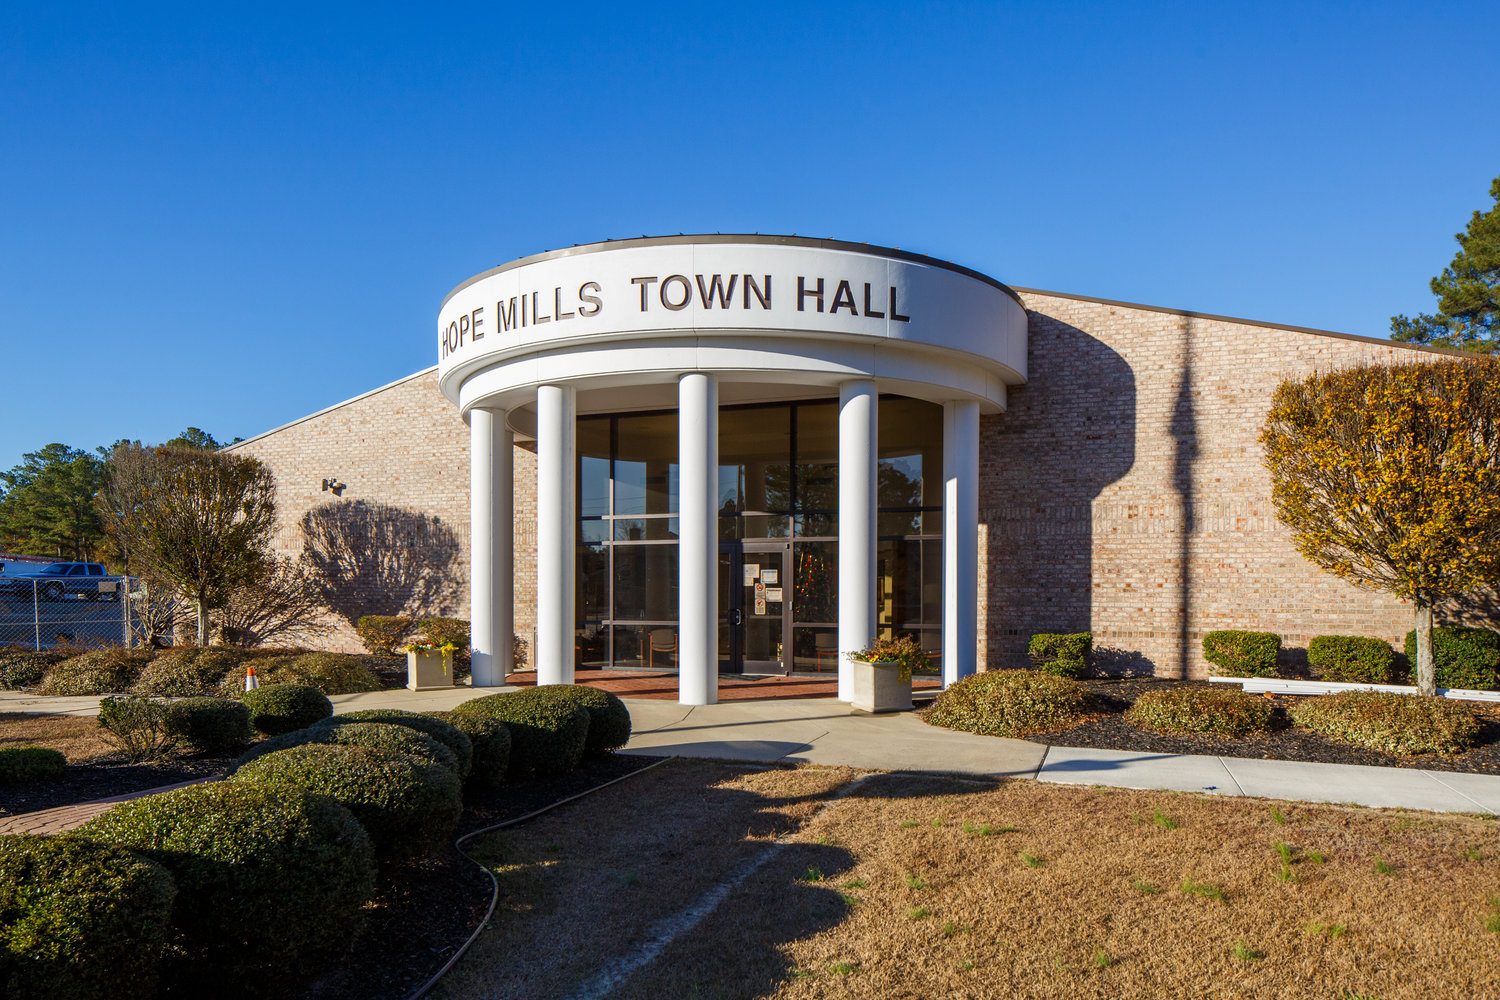 The Hope Mills Board of Commissioners were told Tuesday night that construction of the public safety building is on schedule and on budget.